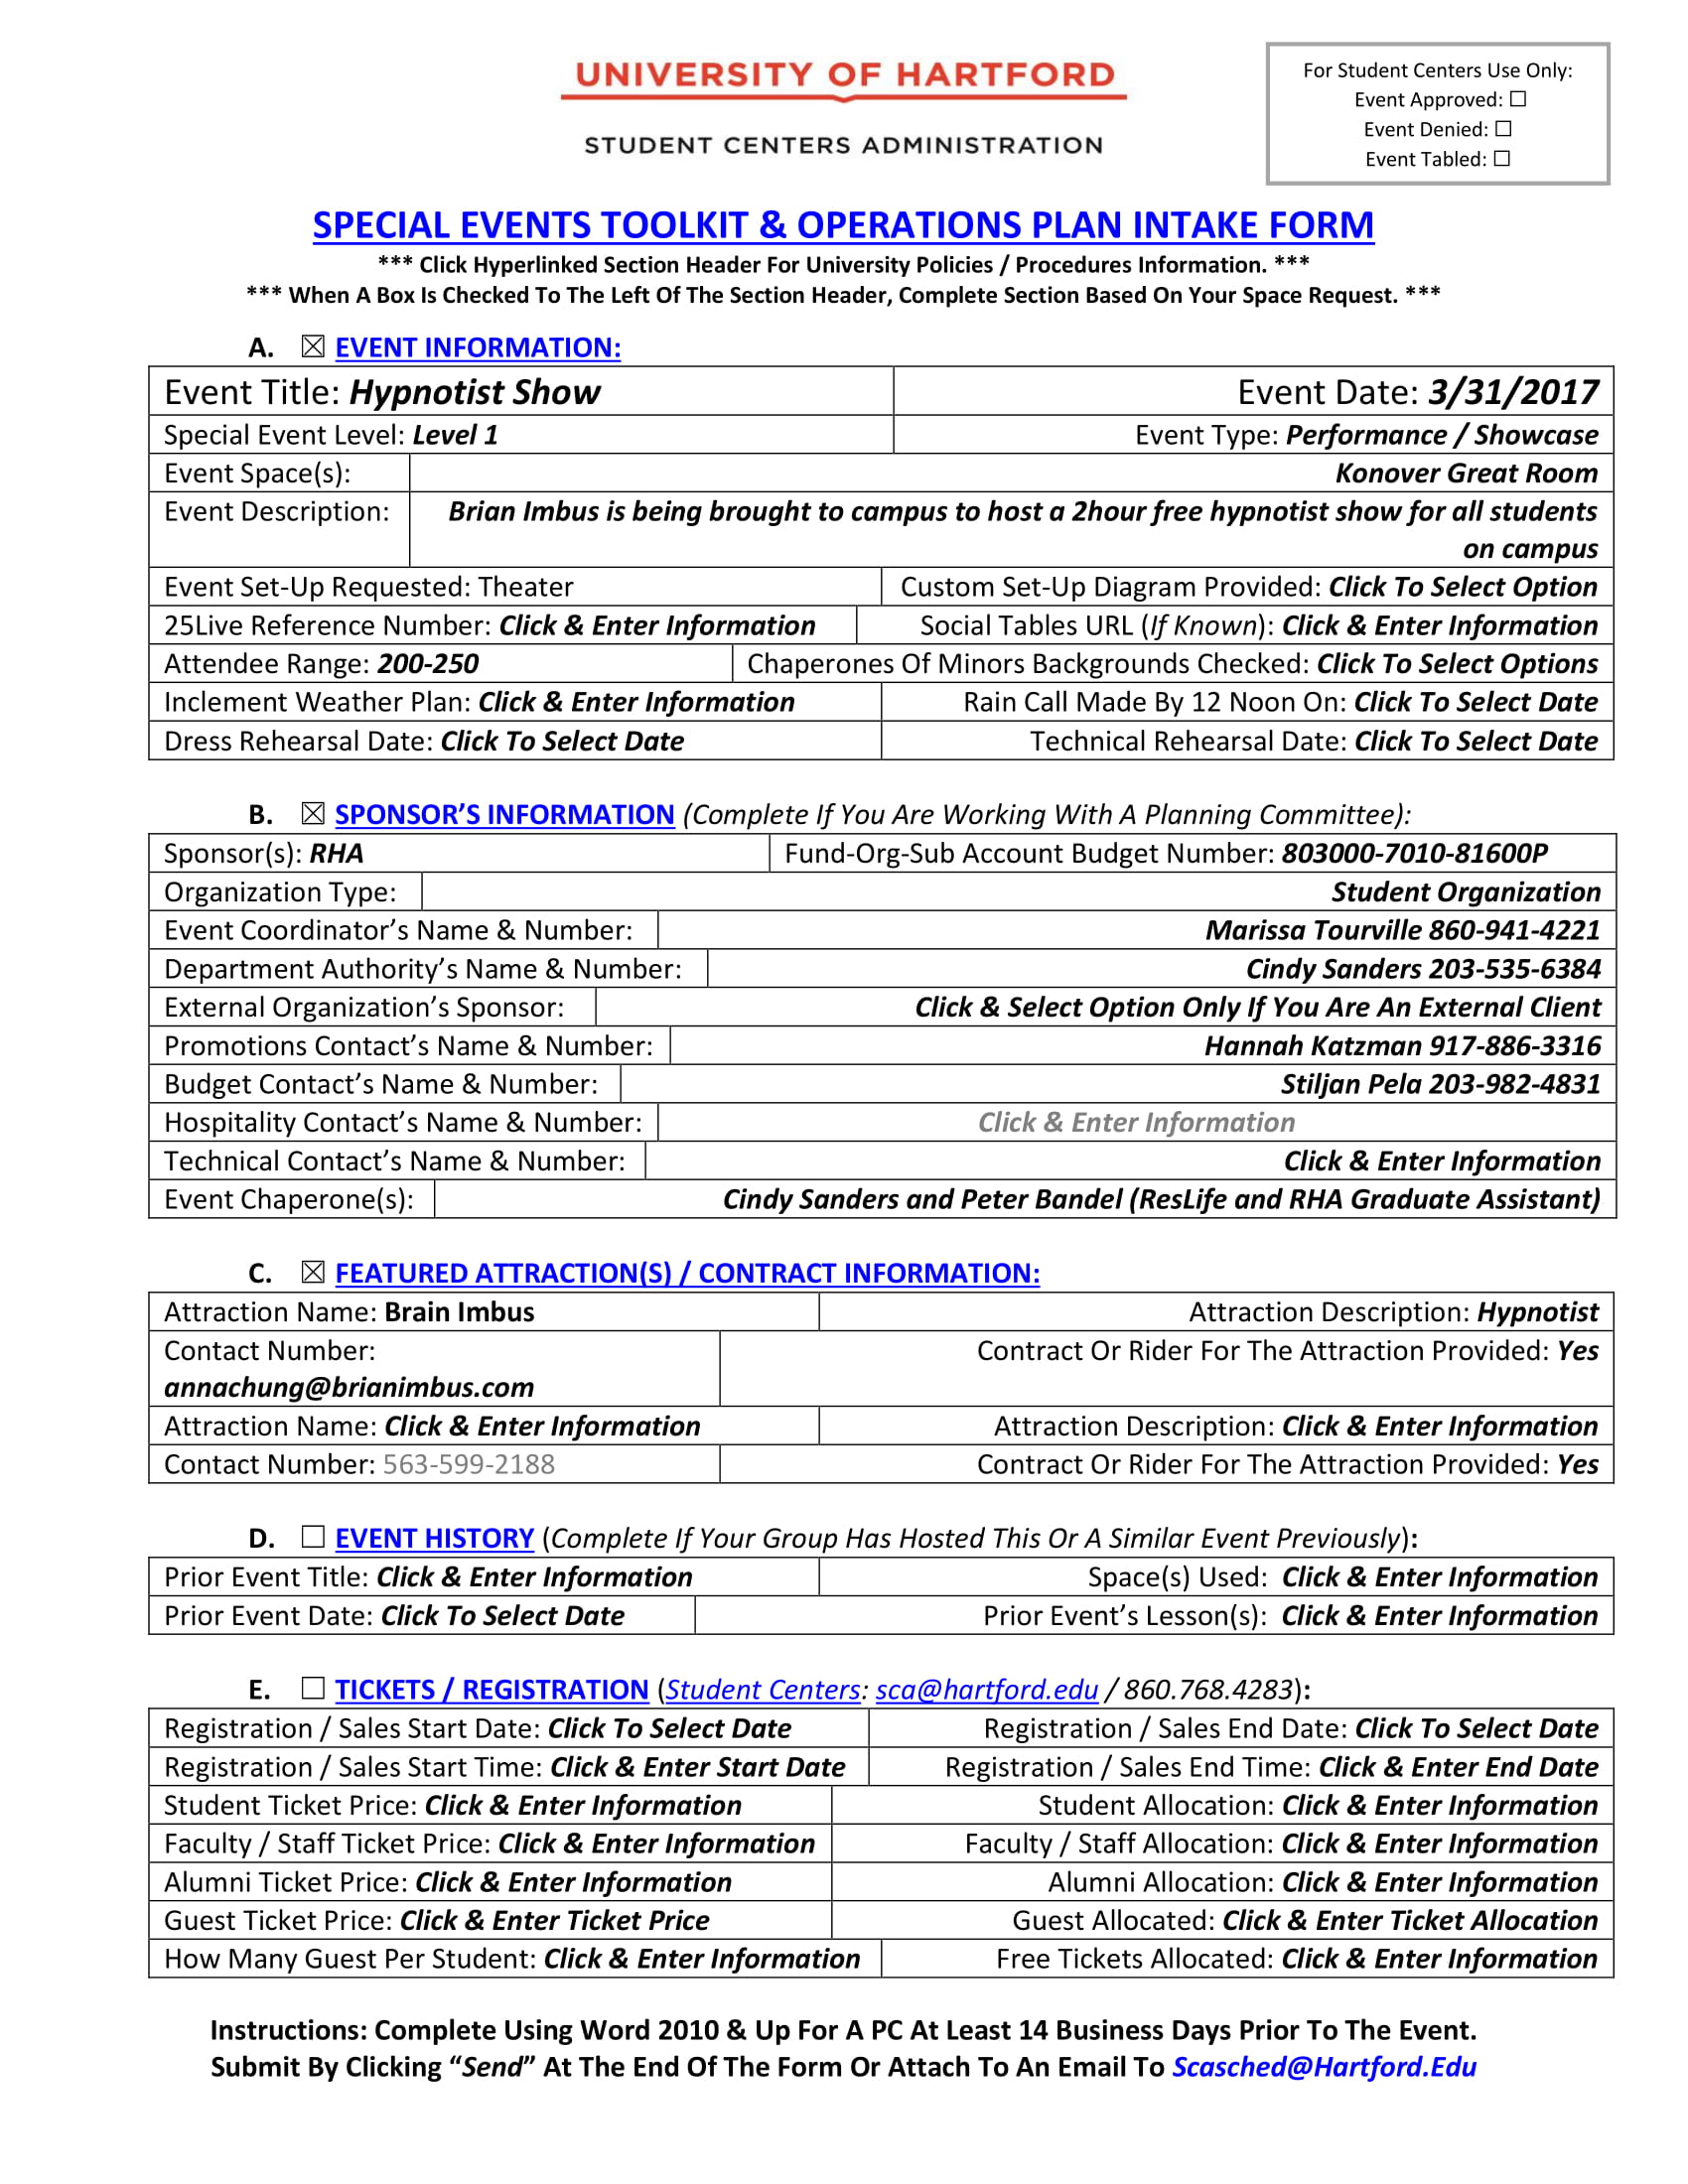 event operations plan intake form 1